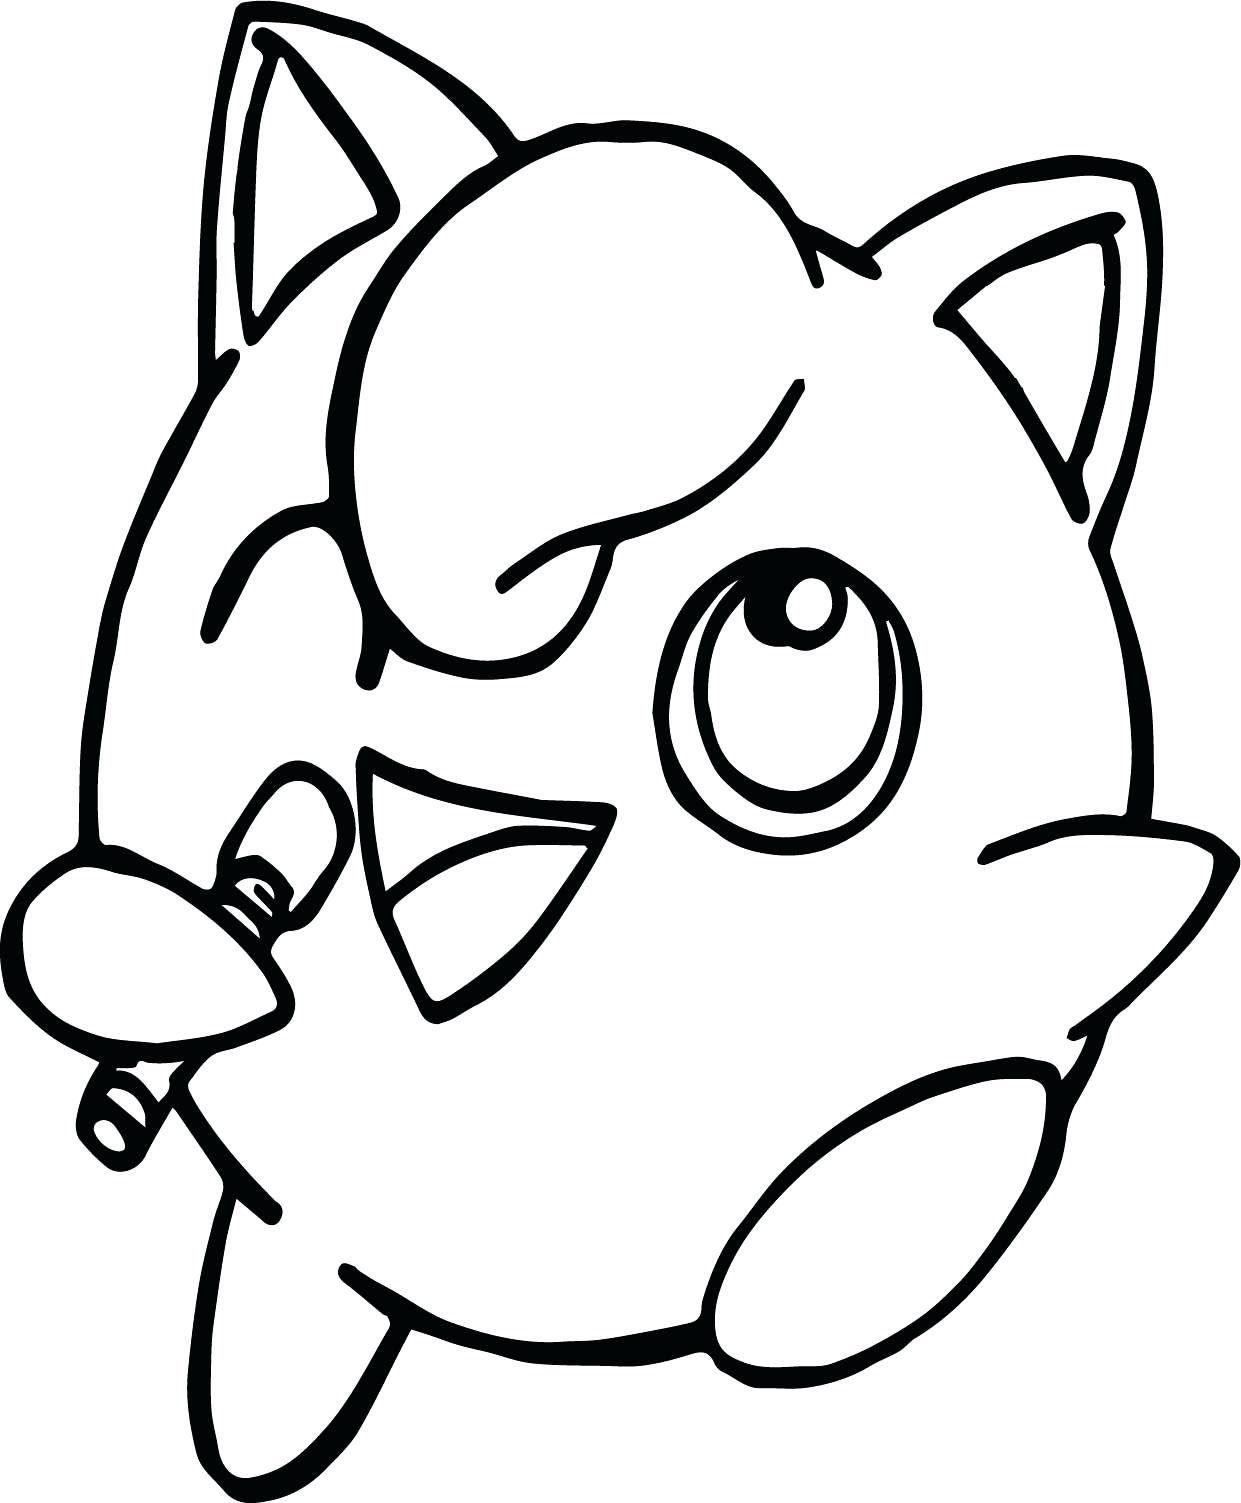 Jigglypuff Coloring Page At GetColorings Free Printable Colorings